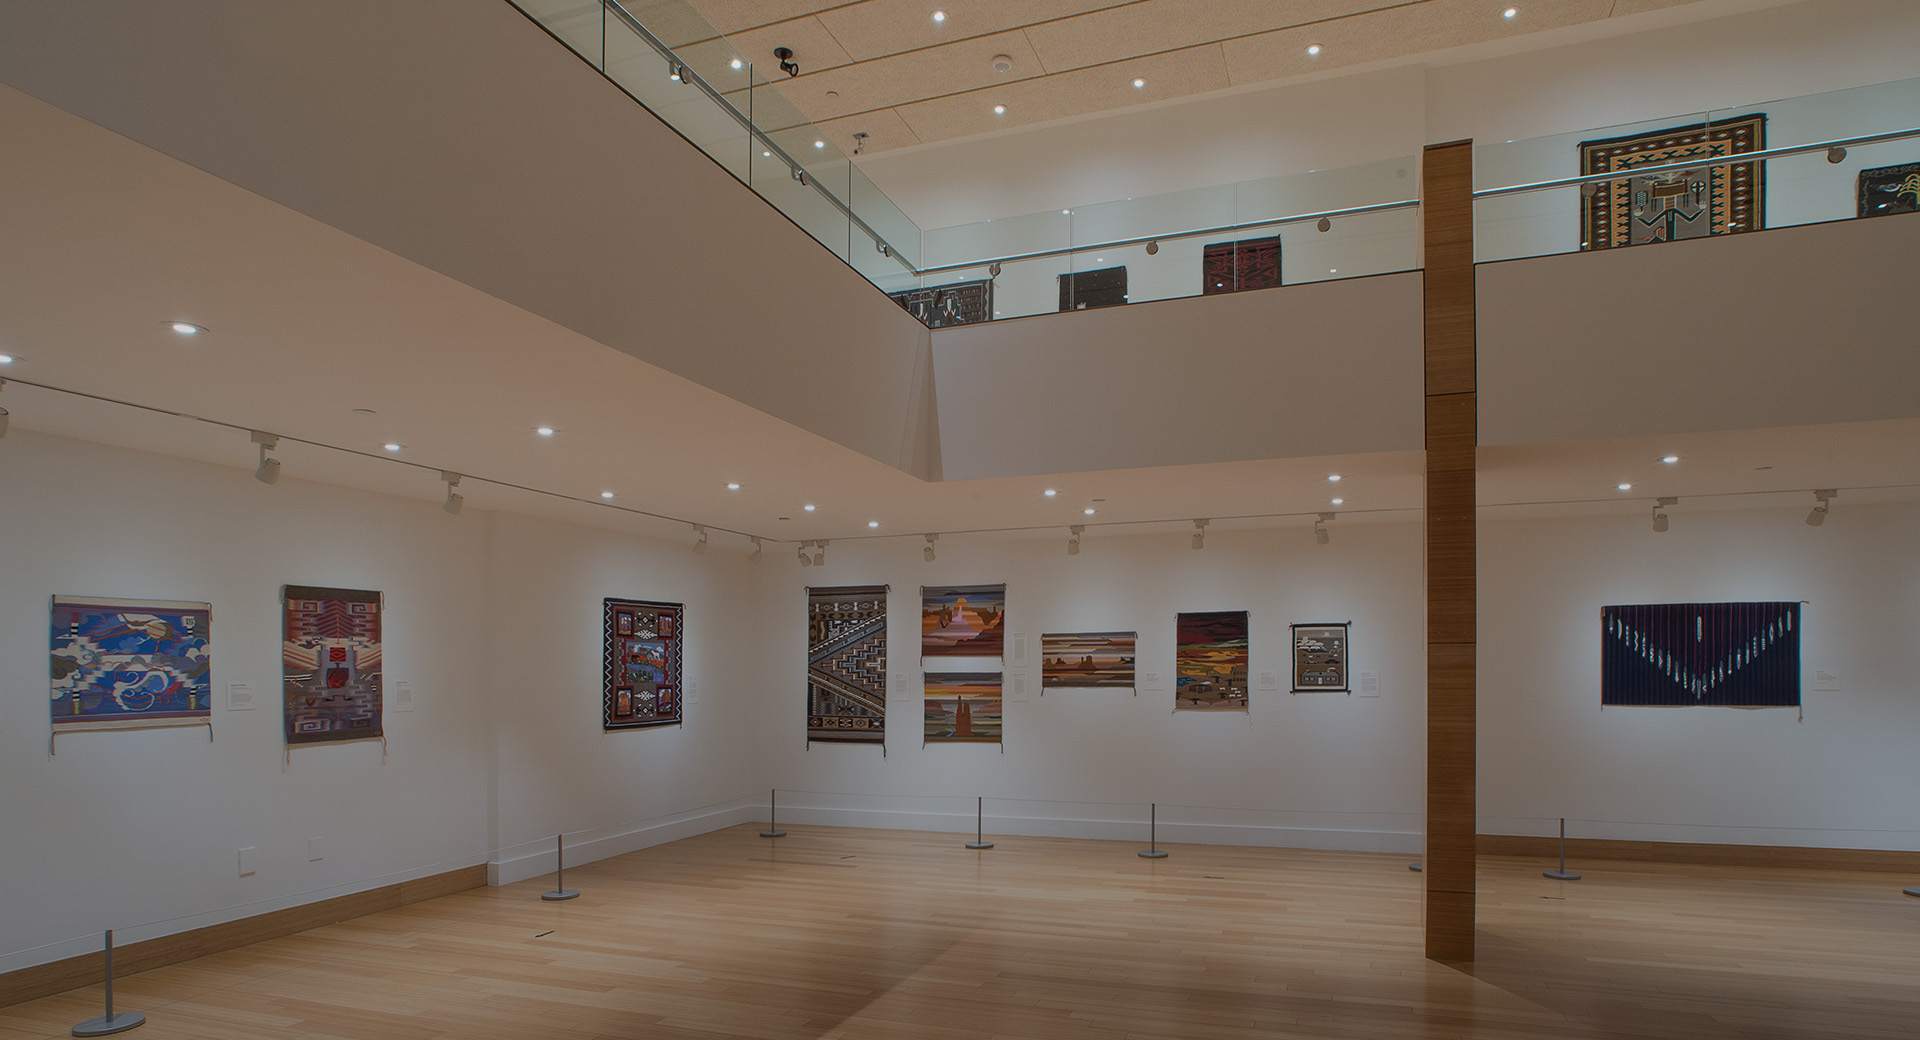 A two story gallery with paintings on the walls and a wooden floor.